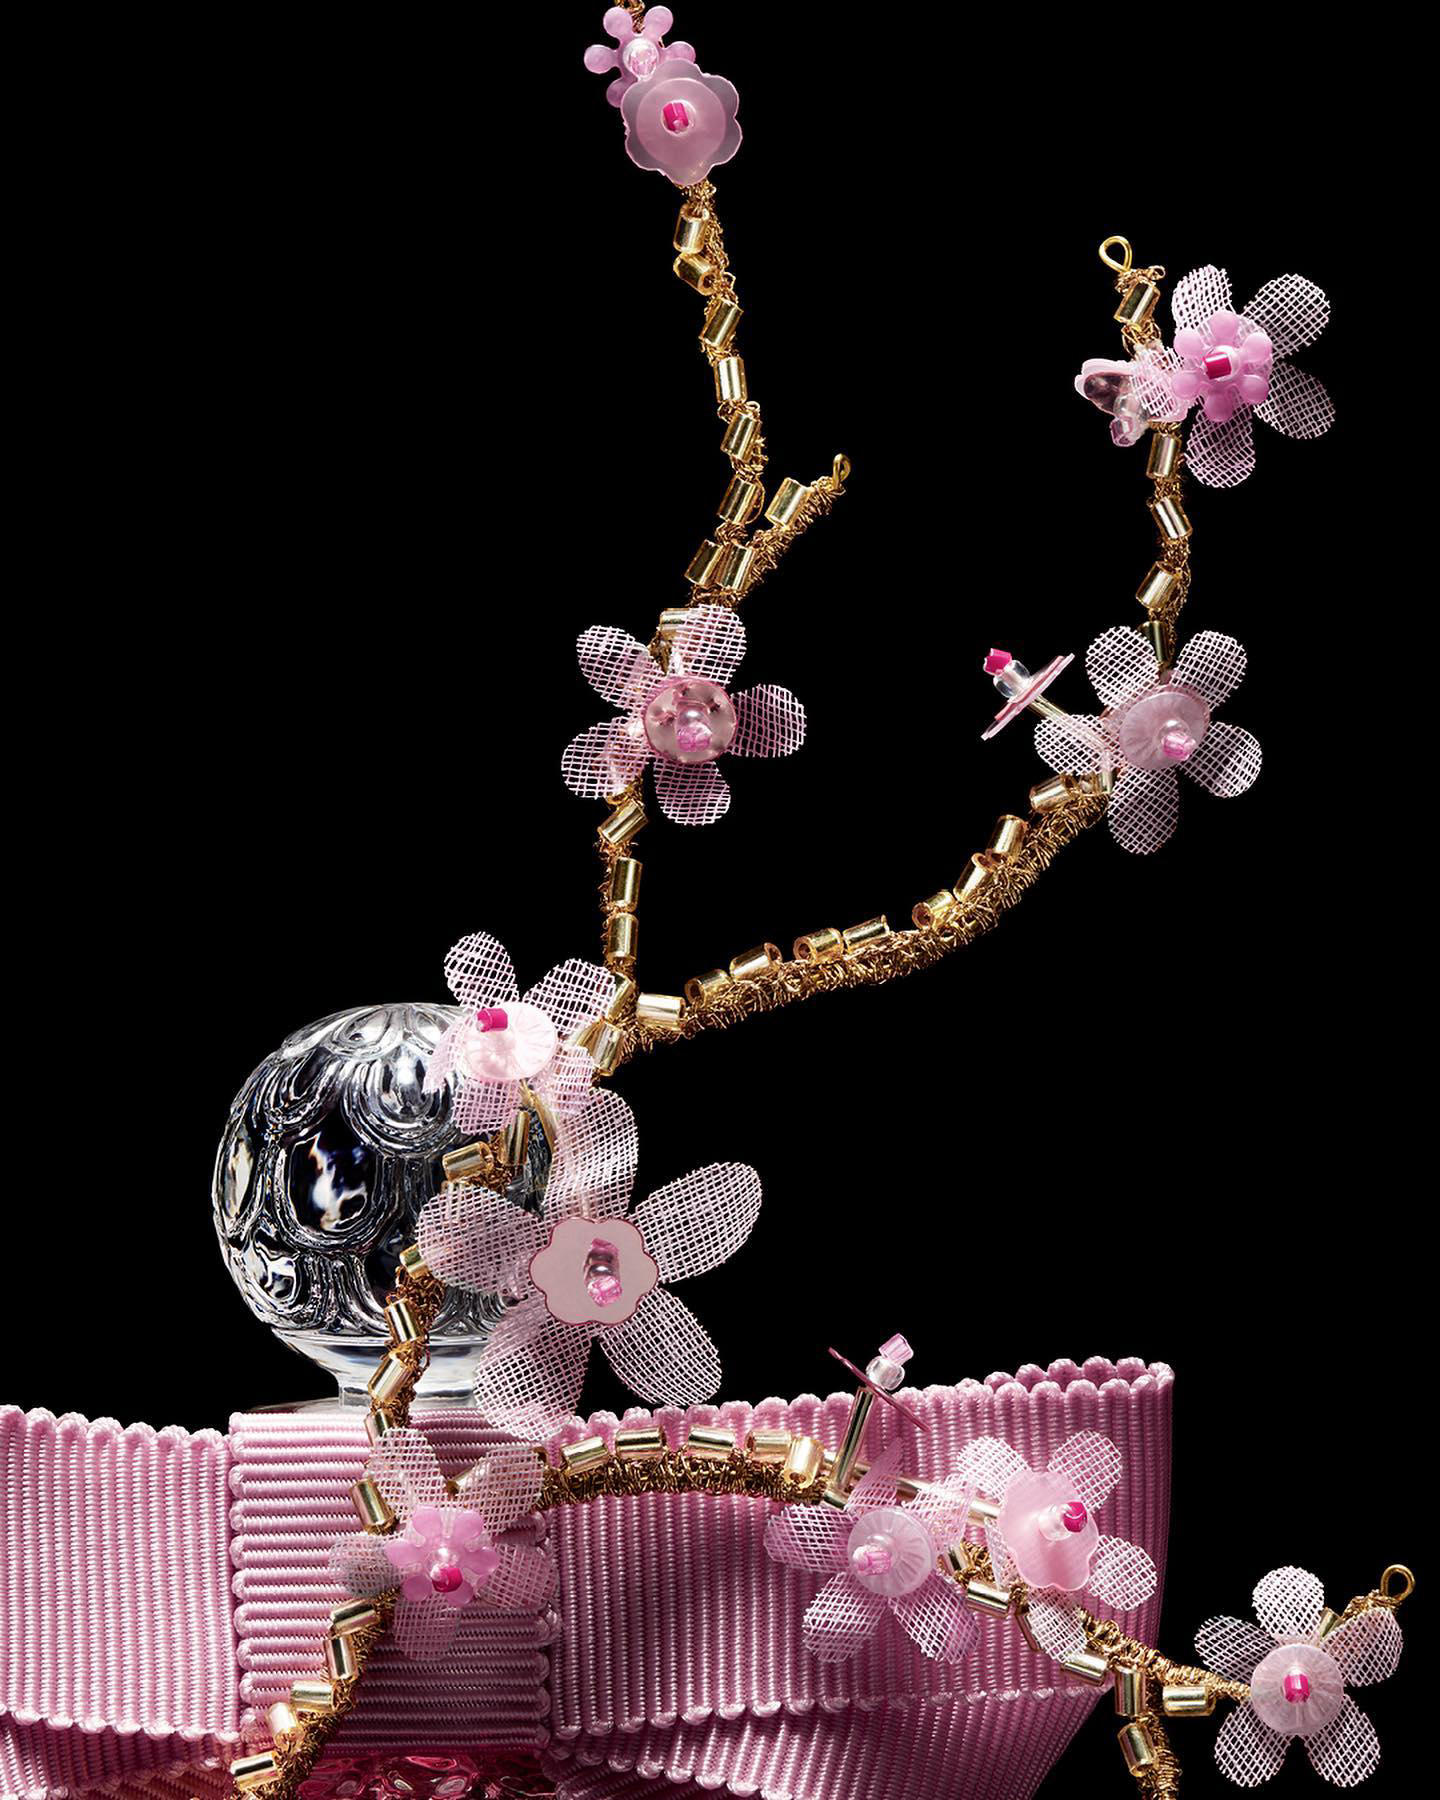 To capture the fleeting beauty of cherry trees in spring, the Guerlain Perfumers have created a frag